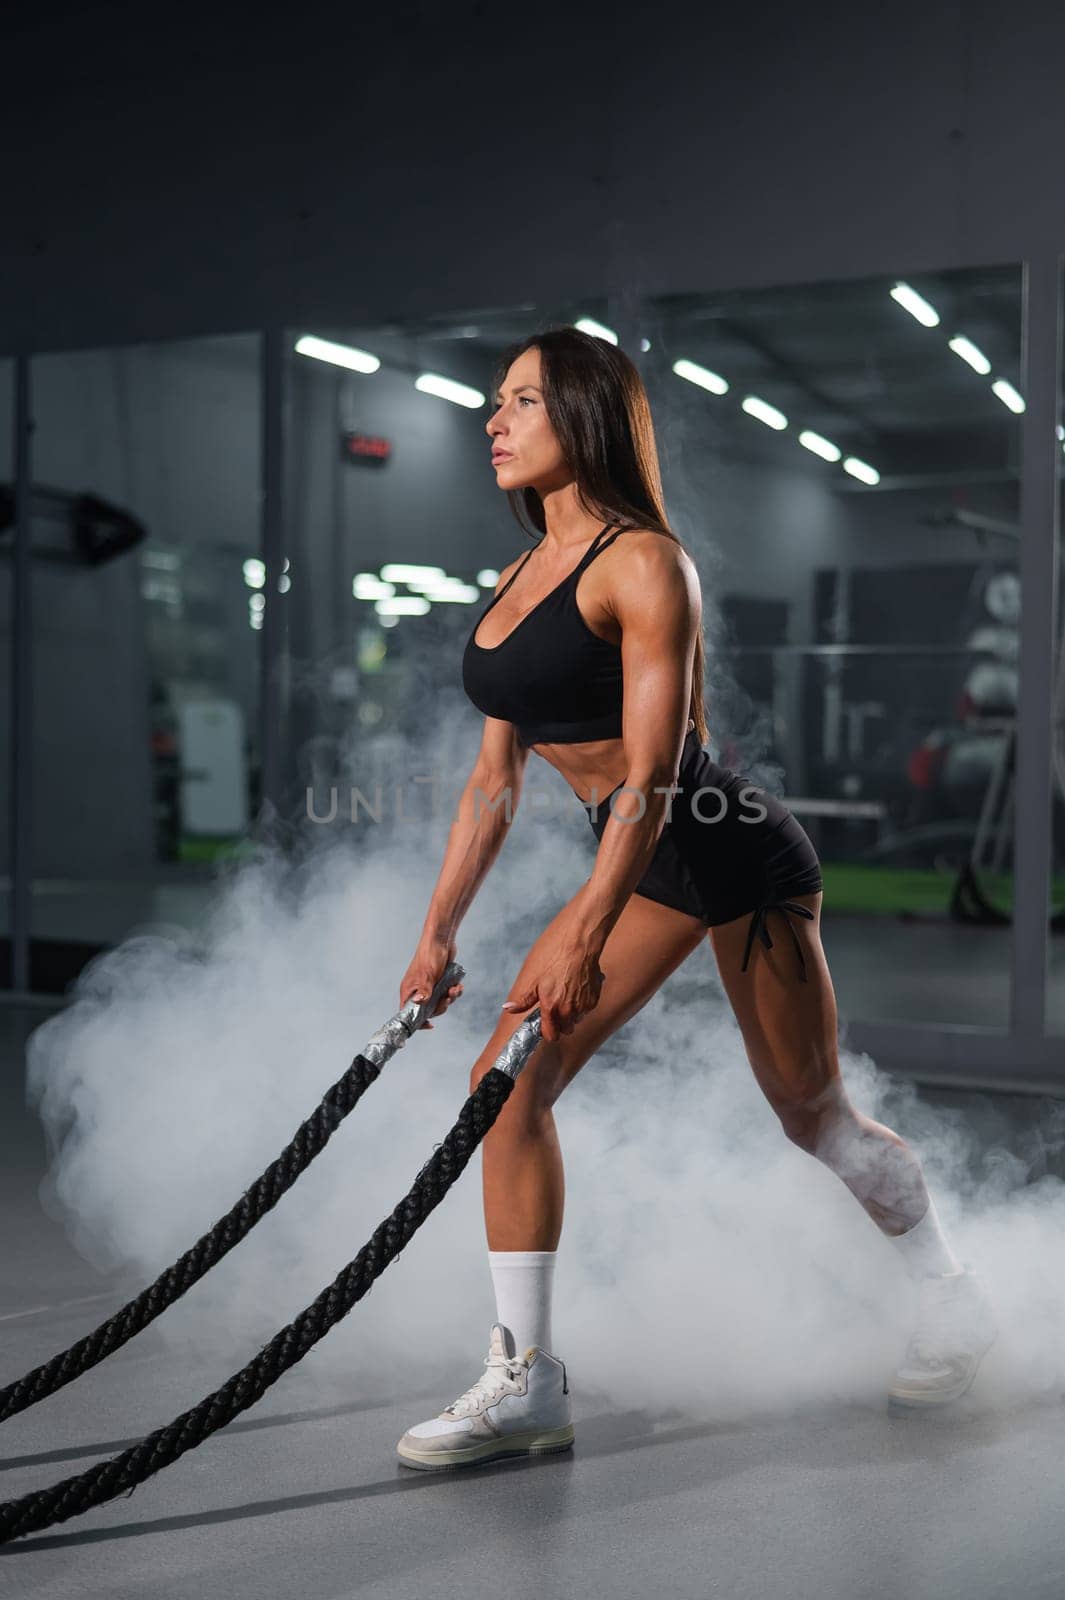 Caucasian woman doing exercise with ropes. Circuit training in the gym. Vertical photo